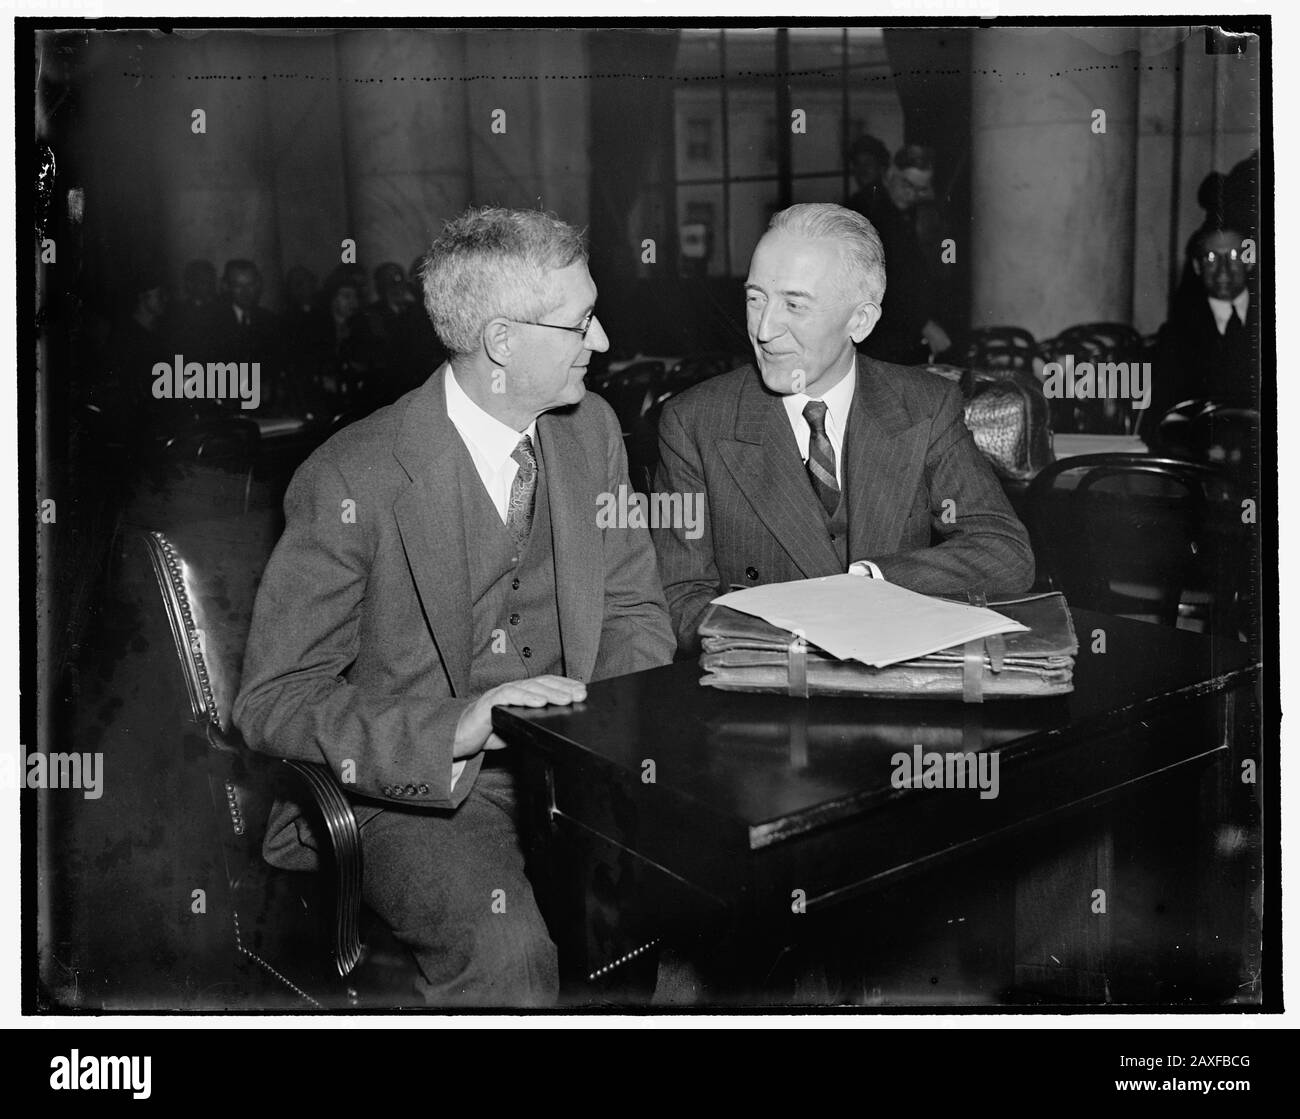 'English: Title: Appear before the Senate Judicary. Washington, D.C., March 18. Appearing before the Senate Judicairy Committee today in defense of the Presidents Supreme Court reorganization plan were Charles Grove Haines of the University of Calif. who is a Professor of Political Science, left: and Dean Leon Green, Dean fo the Law School of Northeaster Univ., right Abstract/medium: 1 negative : glass ; 4 x 5 in. or smaller; 1937; Library of Congress Catalog: https://lccn.loc.gov/2016871382 Image download: https://cdn.loc.gov/master/pnp/hec/22400/22405a.tif Original url: https://www.loc.gov/p Stock Photo